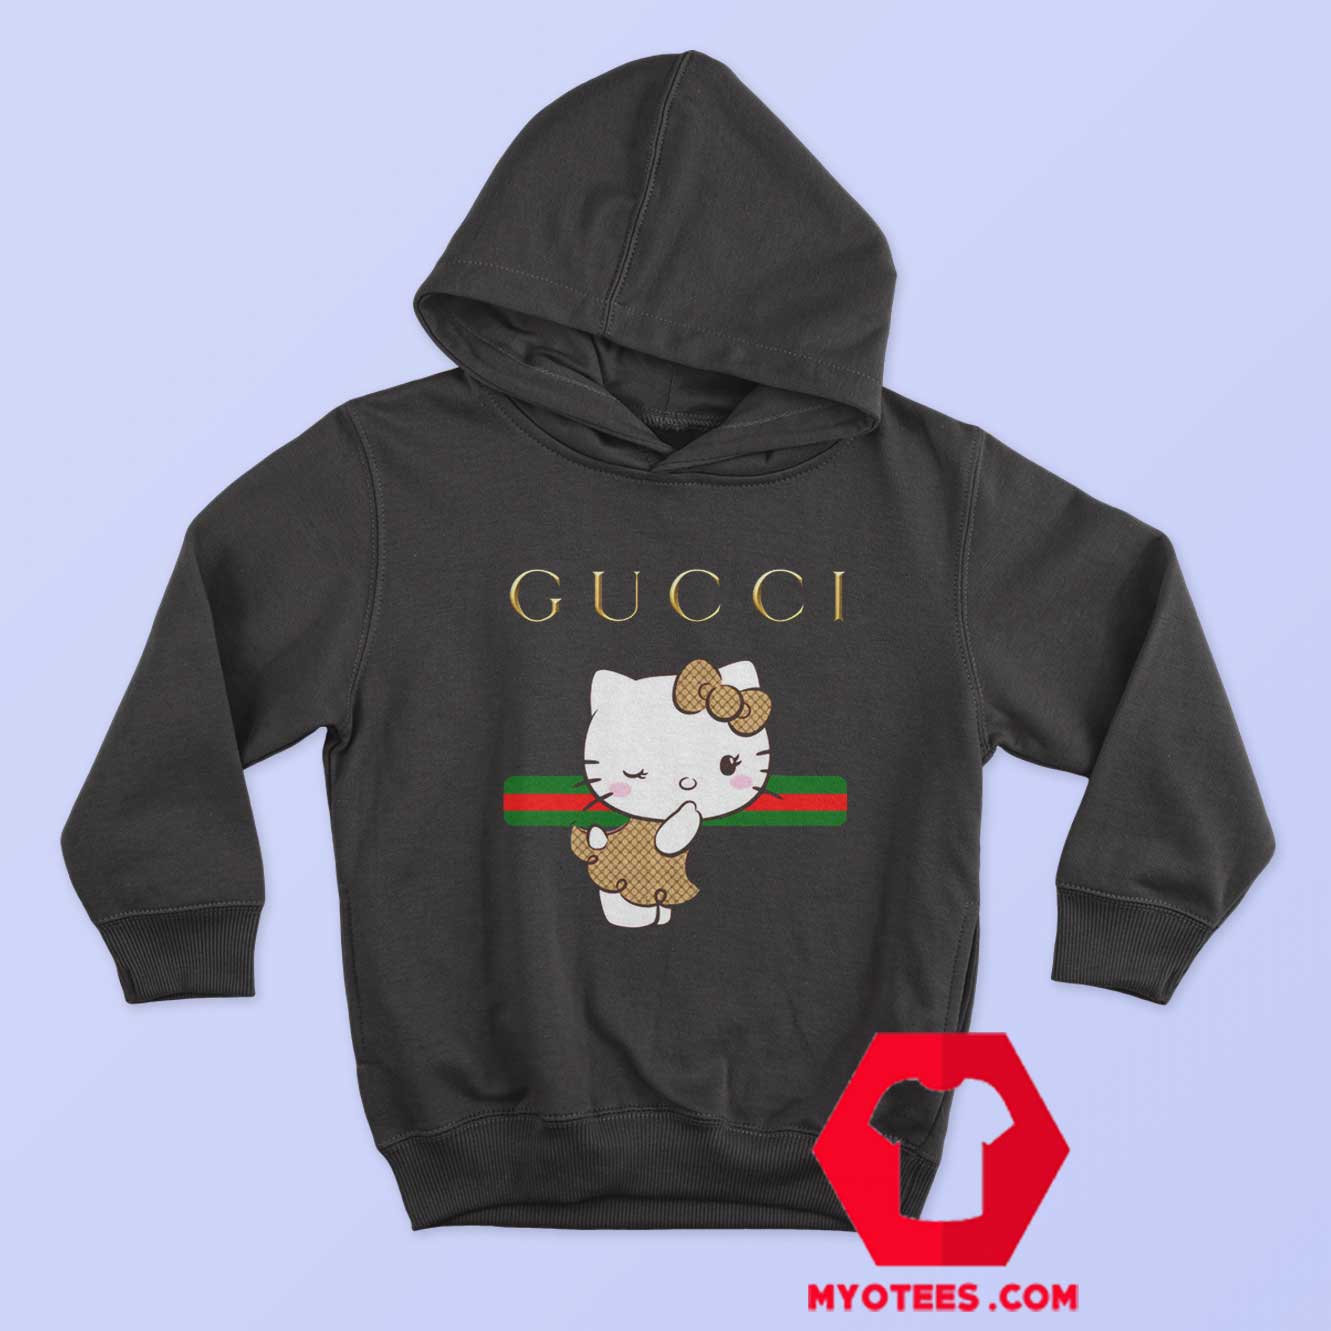 Find Outfit Hello Kitty Gucci Stripe Sweatshirt for Today 